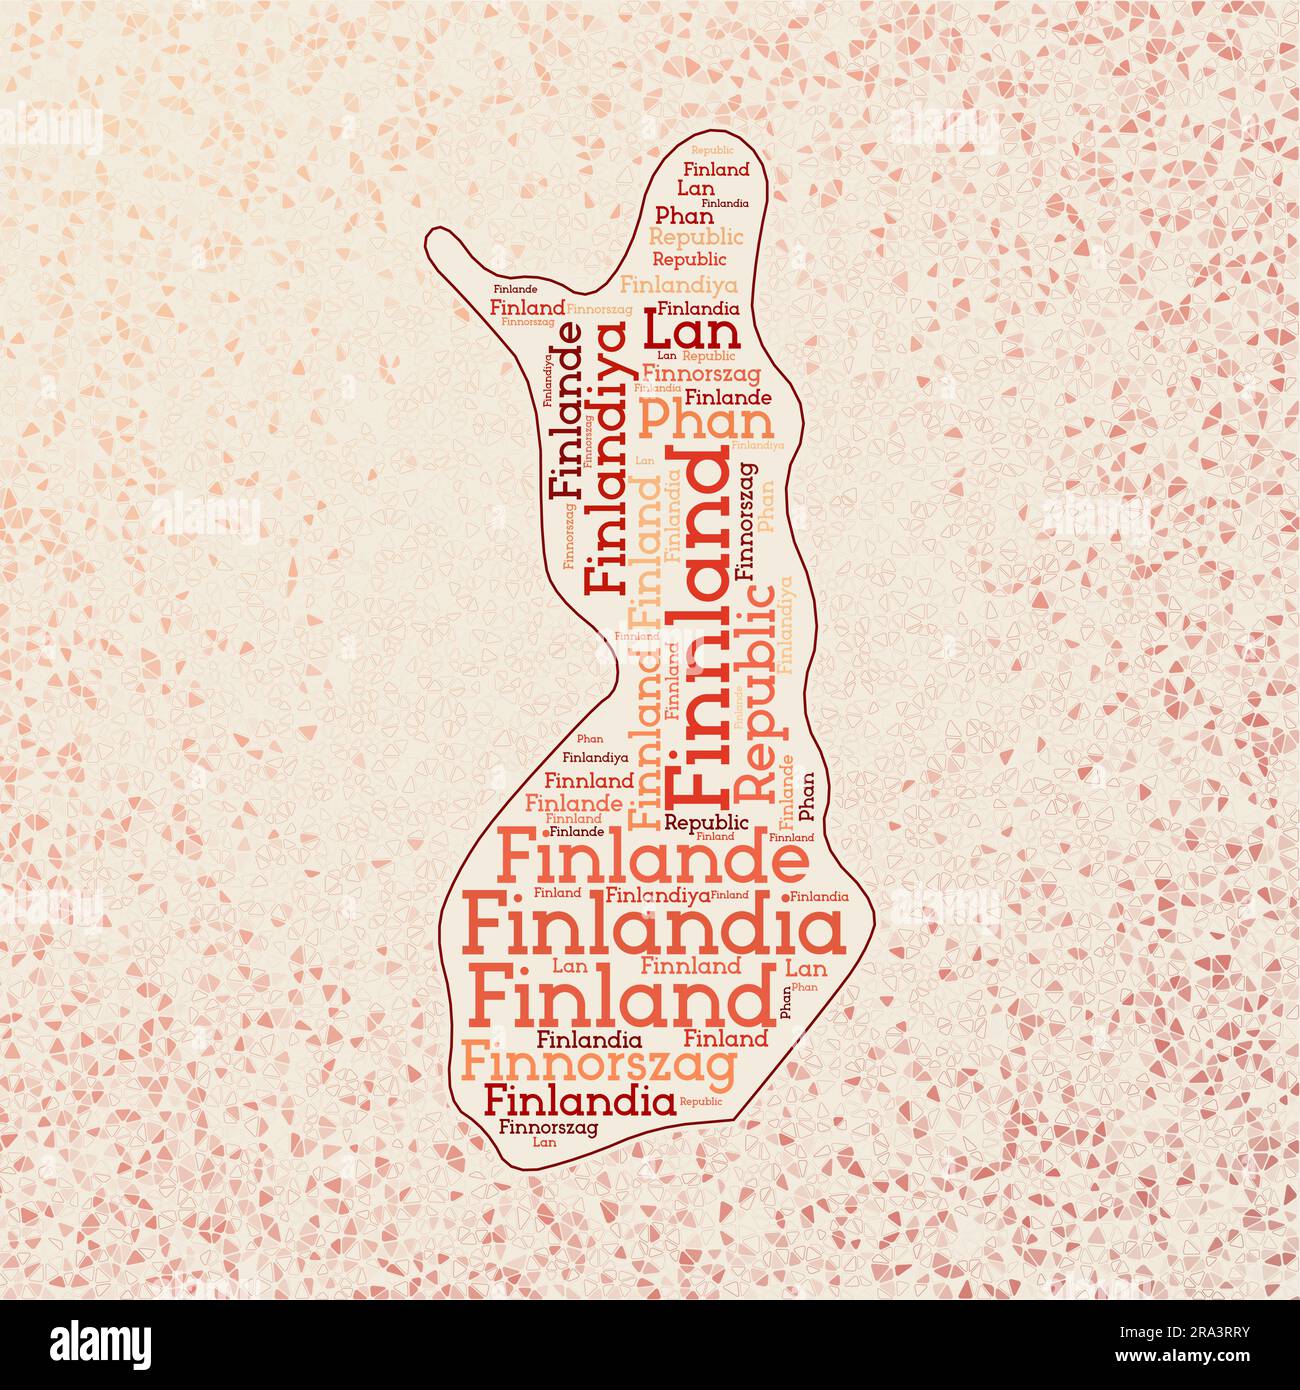 Finland shape whith country names word cloud in multiple languages ...